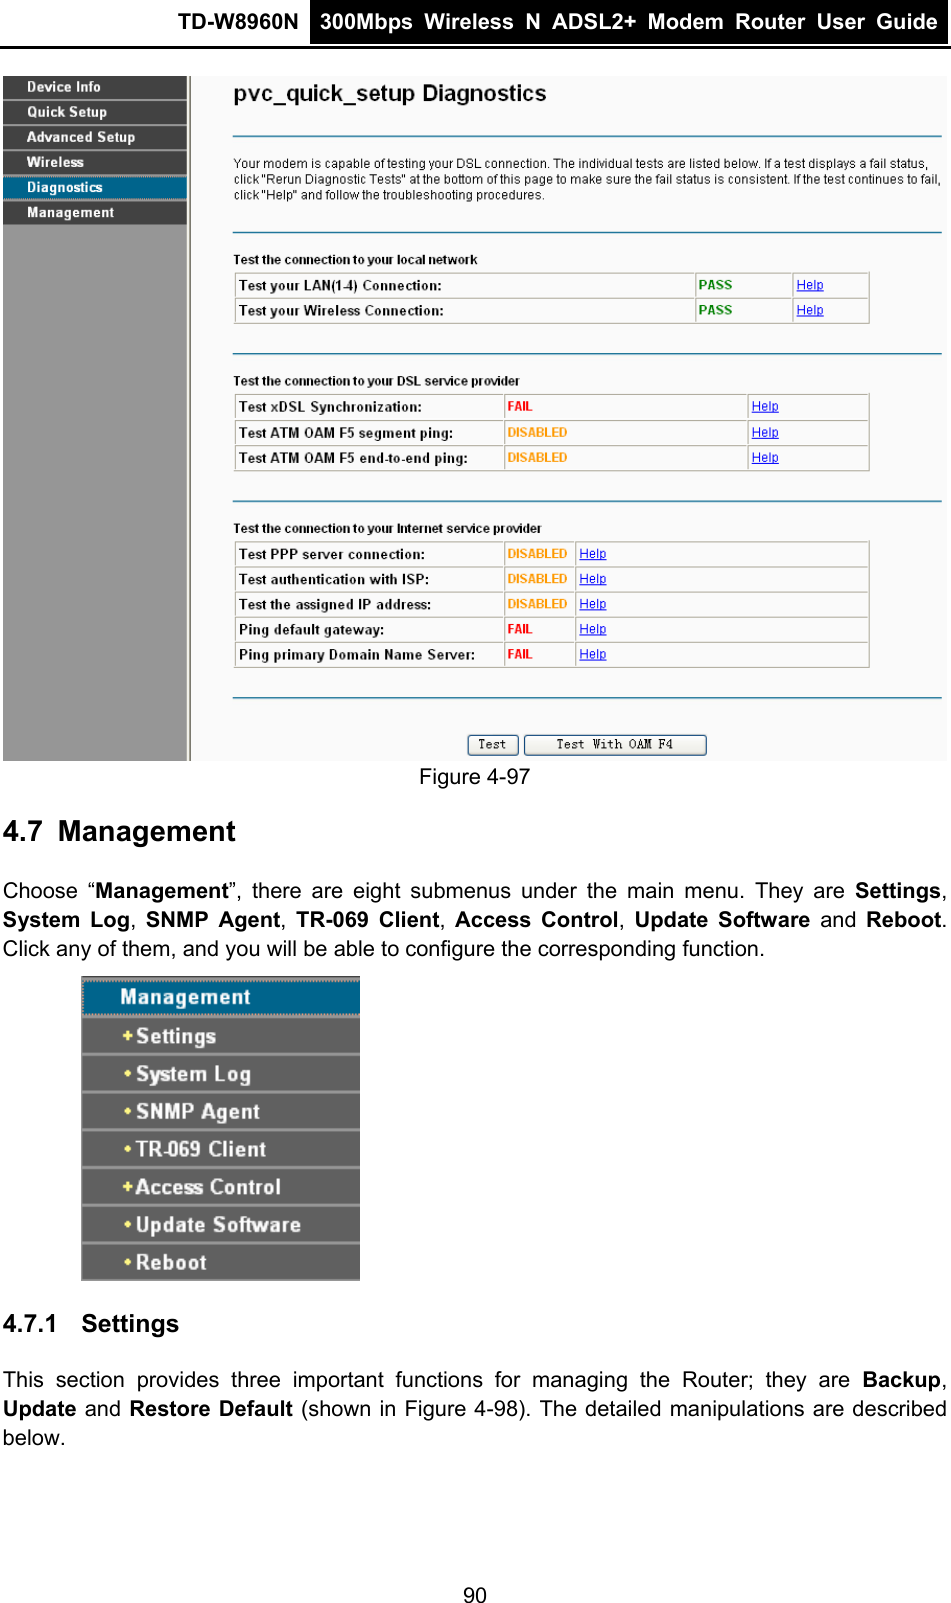 TD-W8960N  300Mbps Wireless N ADSL2+ Modem Router User Guide   Figure 4-97 4.7  Management Choose “Management”, there are eight submenus under the main menu. They are Settings, System Log,  SNMP Agent,  TR-069 Client,  Access Control,  Update Software and Reboot. Click any of them, and you will be able to configure the corresponding function.  4.7.1  Settings This section provides three important functions for managing the Router; they are Backup, Update and Restore Default (shown in Figure 4-98). The detailed manipulations are described below. 90 